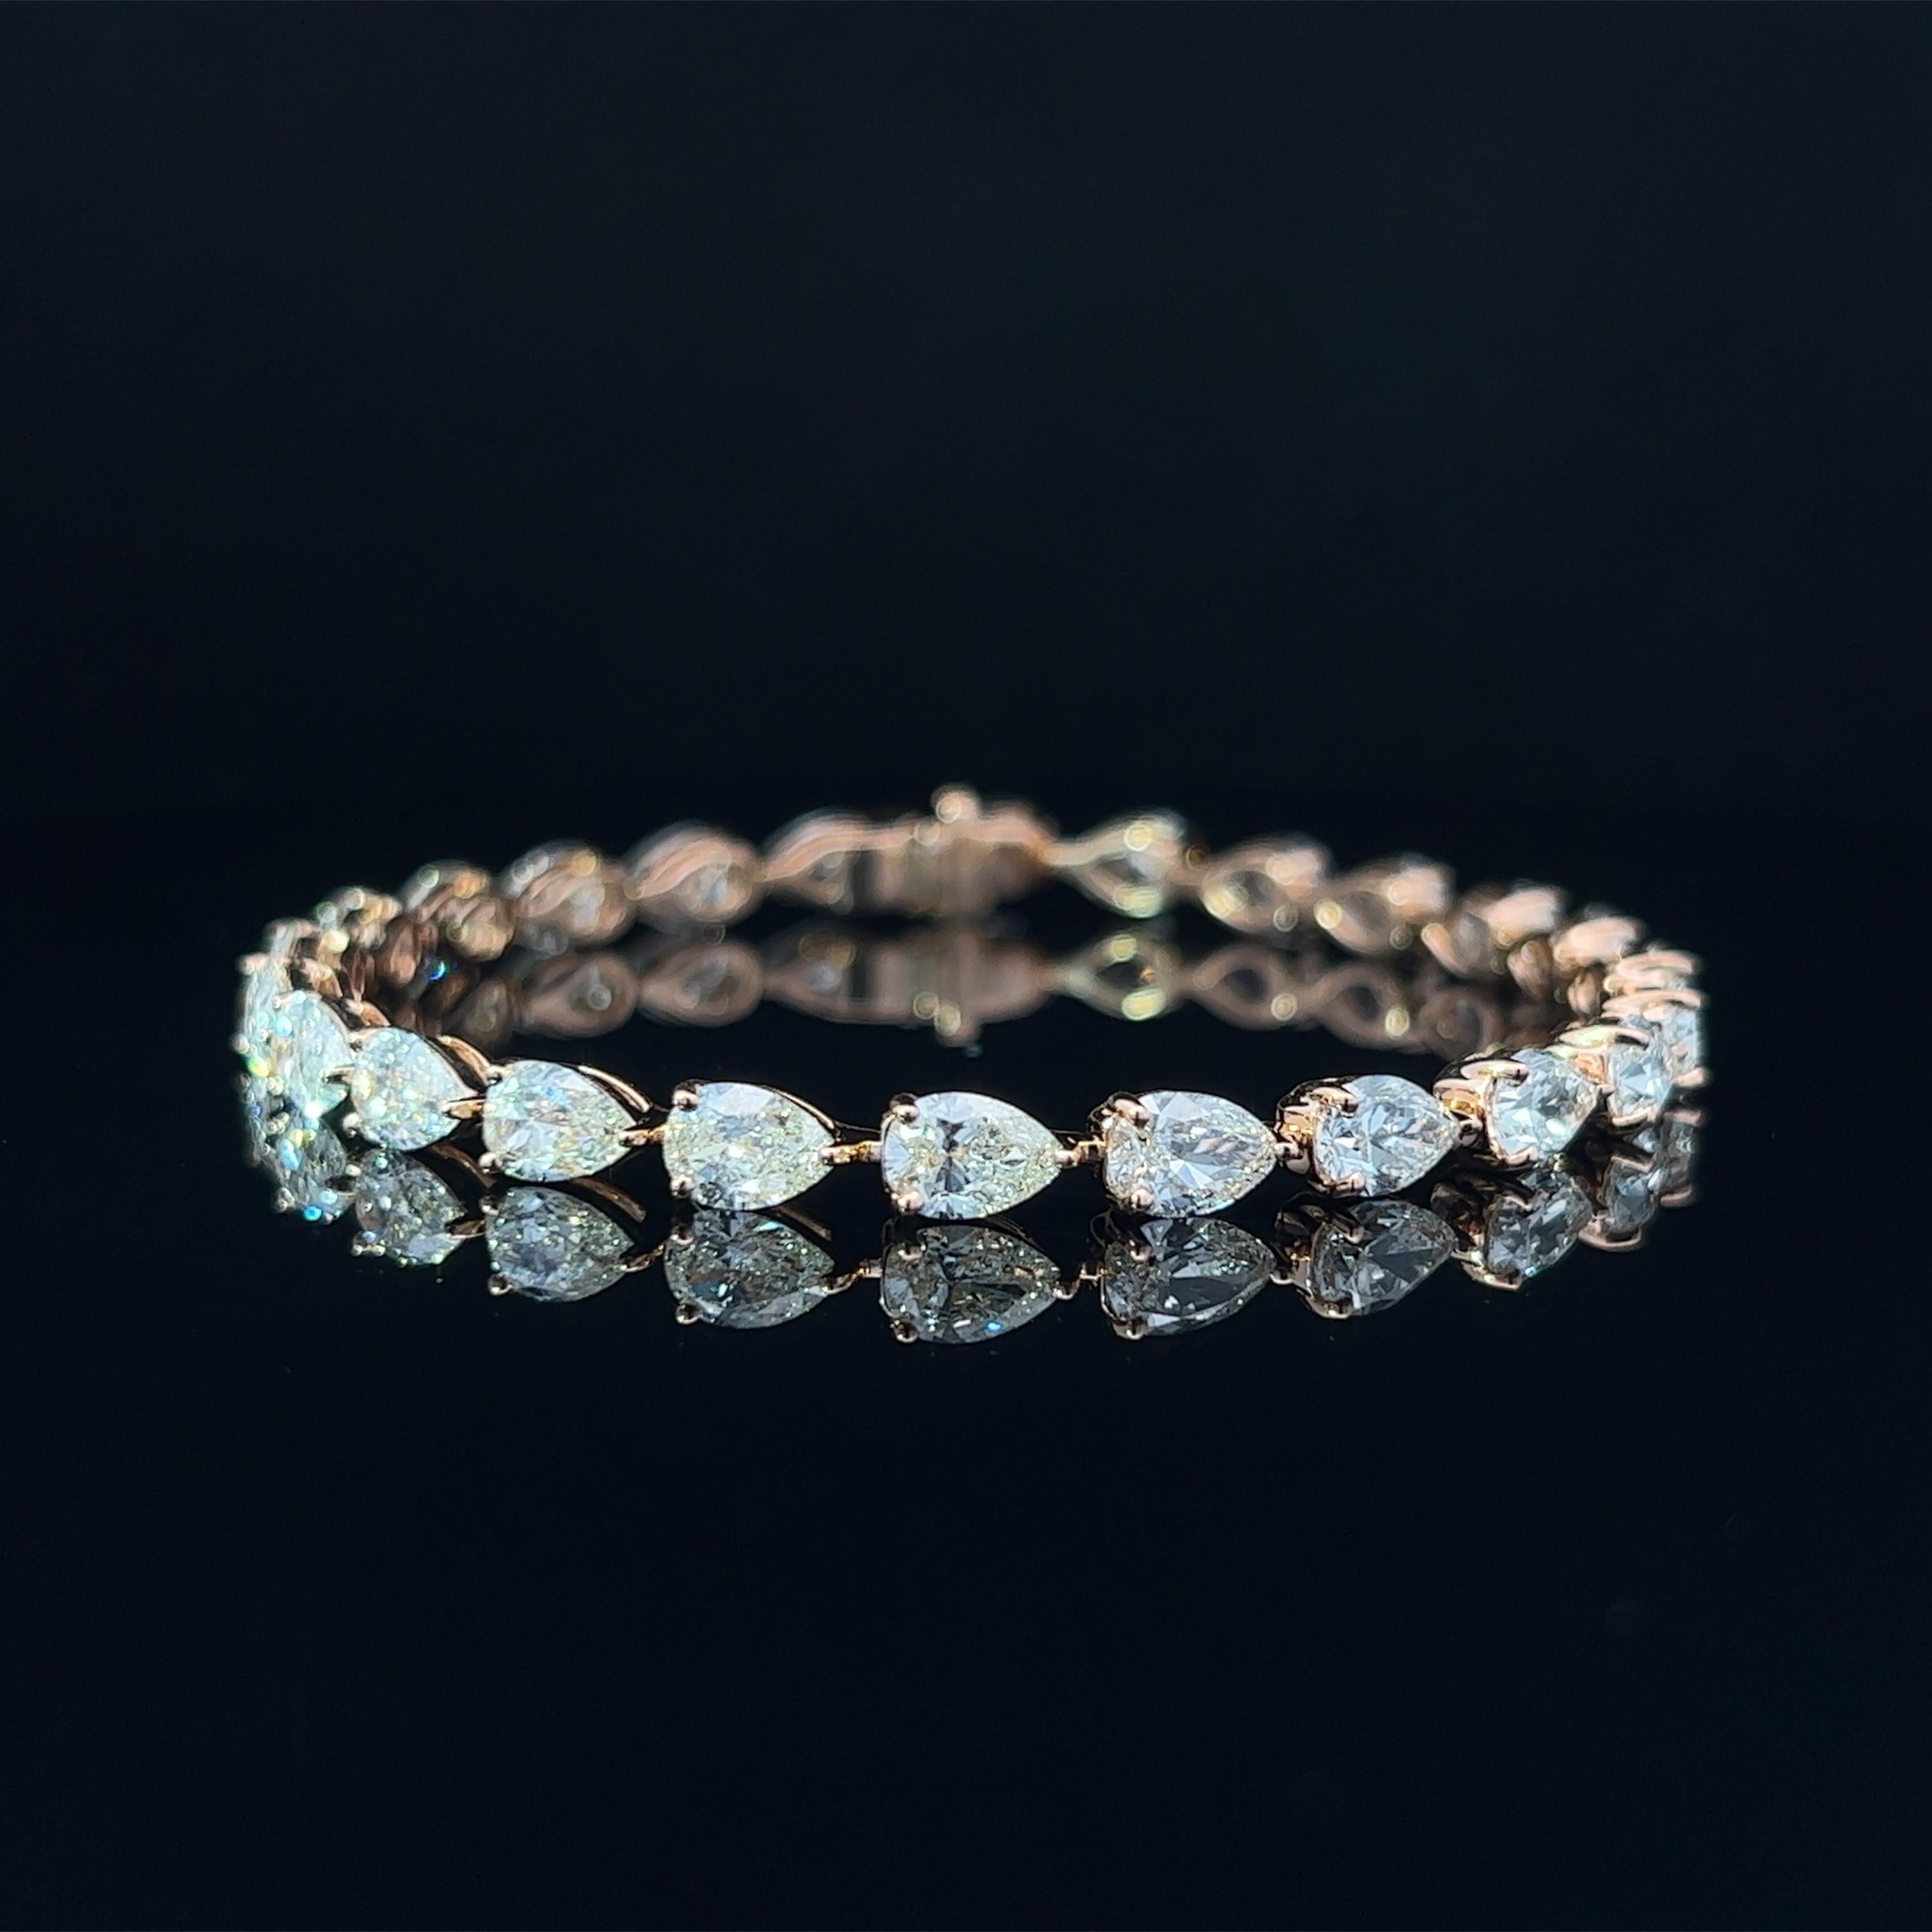 Diamond Shape: Pear Cut 
Total Diamond Weight: 12.12ct
Individual Diamond Weight: .50ct
Color/Clarity: GH VS
Metal: 18K Rose Gold  
Metal Weight: 10.95g 

Key Features:

Pear-Cut Diamonds: The centerpiece of this bracelet features a dazzling array